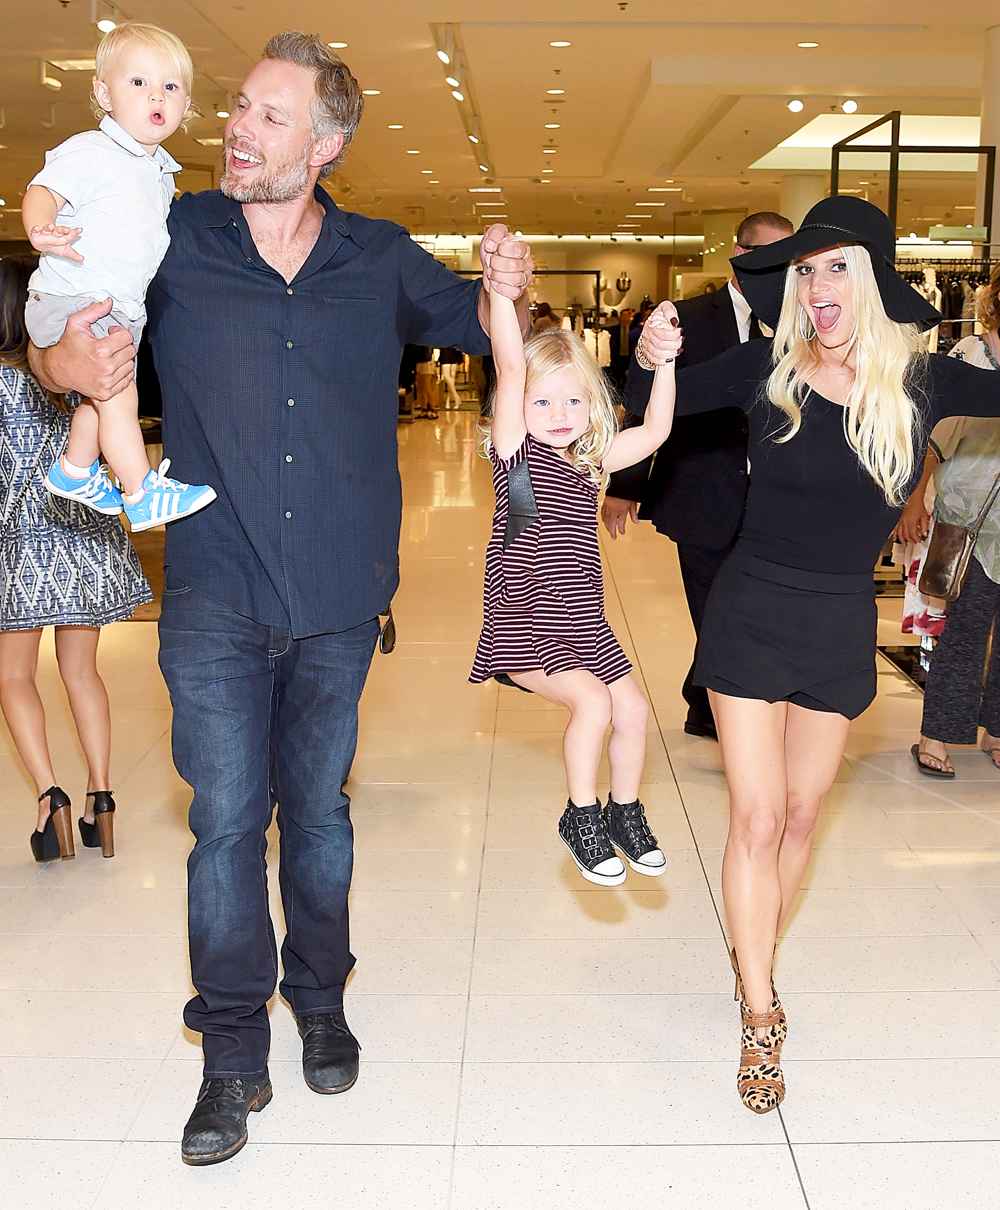 Jessica Simpson and Eric Johnson with their son Ace and daughter Maxwell attend 2014 Jessica Simpson Collection Fashion Show at Nordstrom in Los Angeles, California.